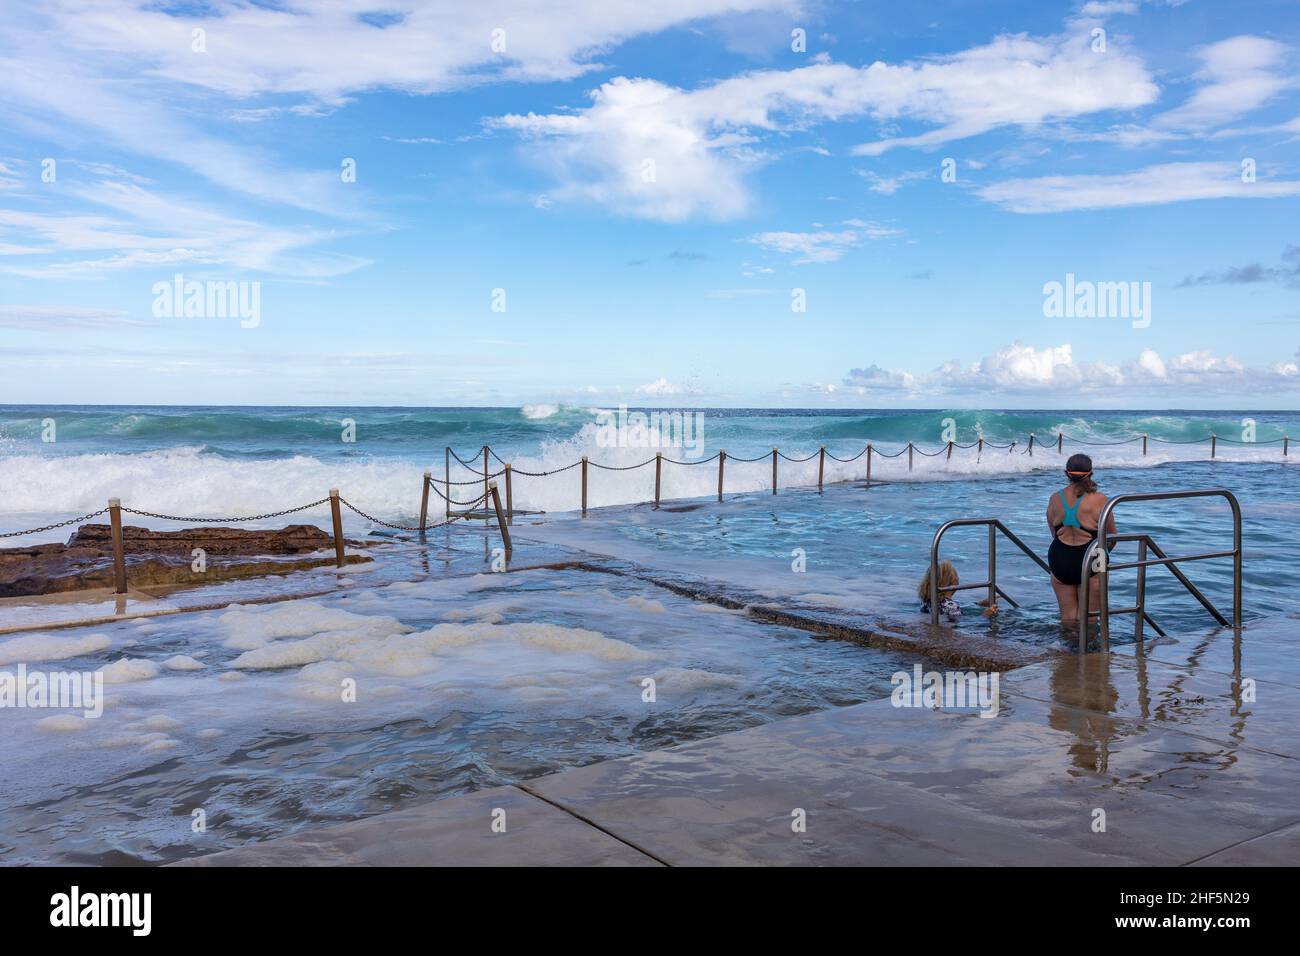 Two ladies prepare to swim in the Avalon Beach ocean rock pool as large waves crash into the pool and beach,Sydney,Australia late afternoon Stock Photo